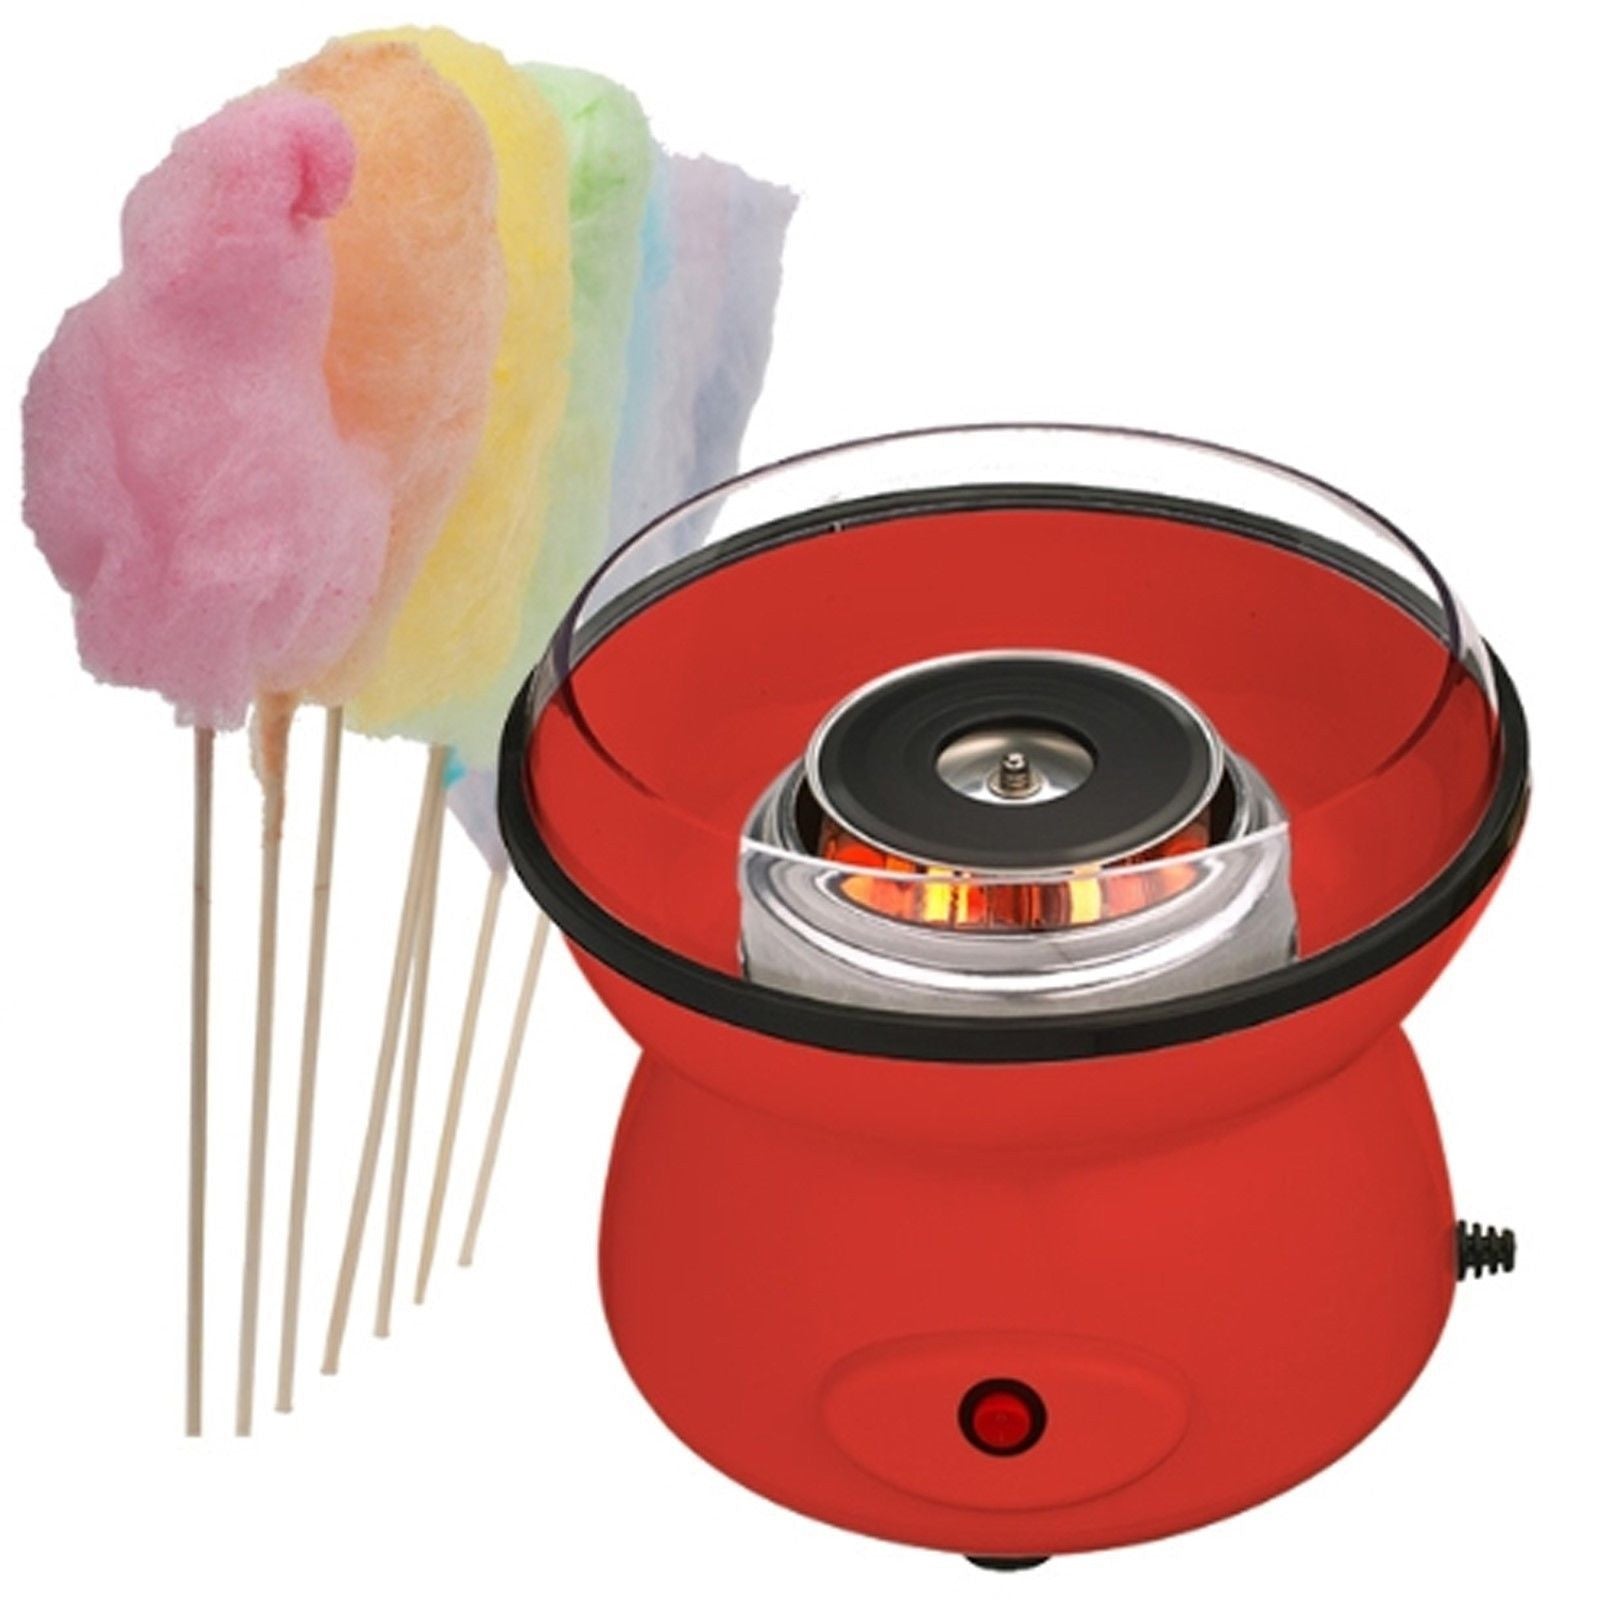 Products　FLOSS　MACHINE　CANDY　SUGAR　COTTON　MAKER　MAKING　CANDYFLOSS　ELECTRIC　SA　HOME　–